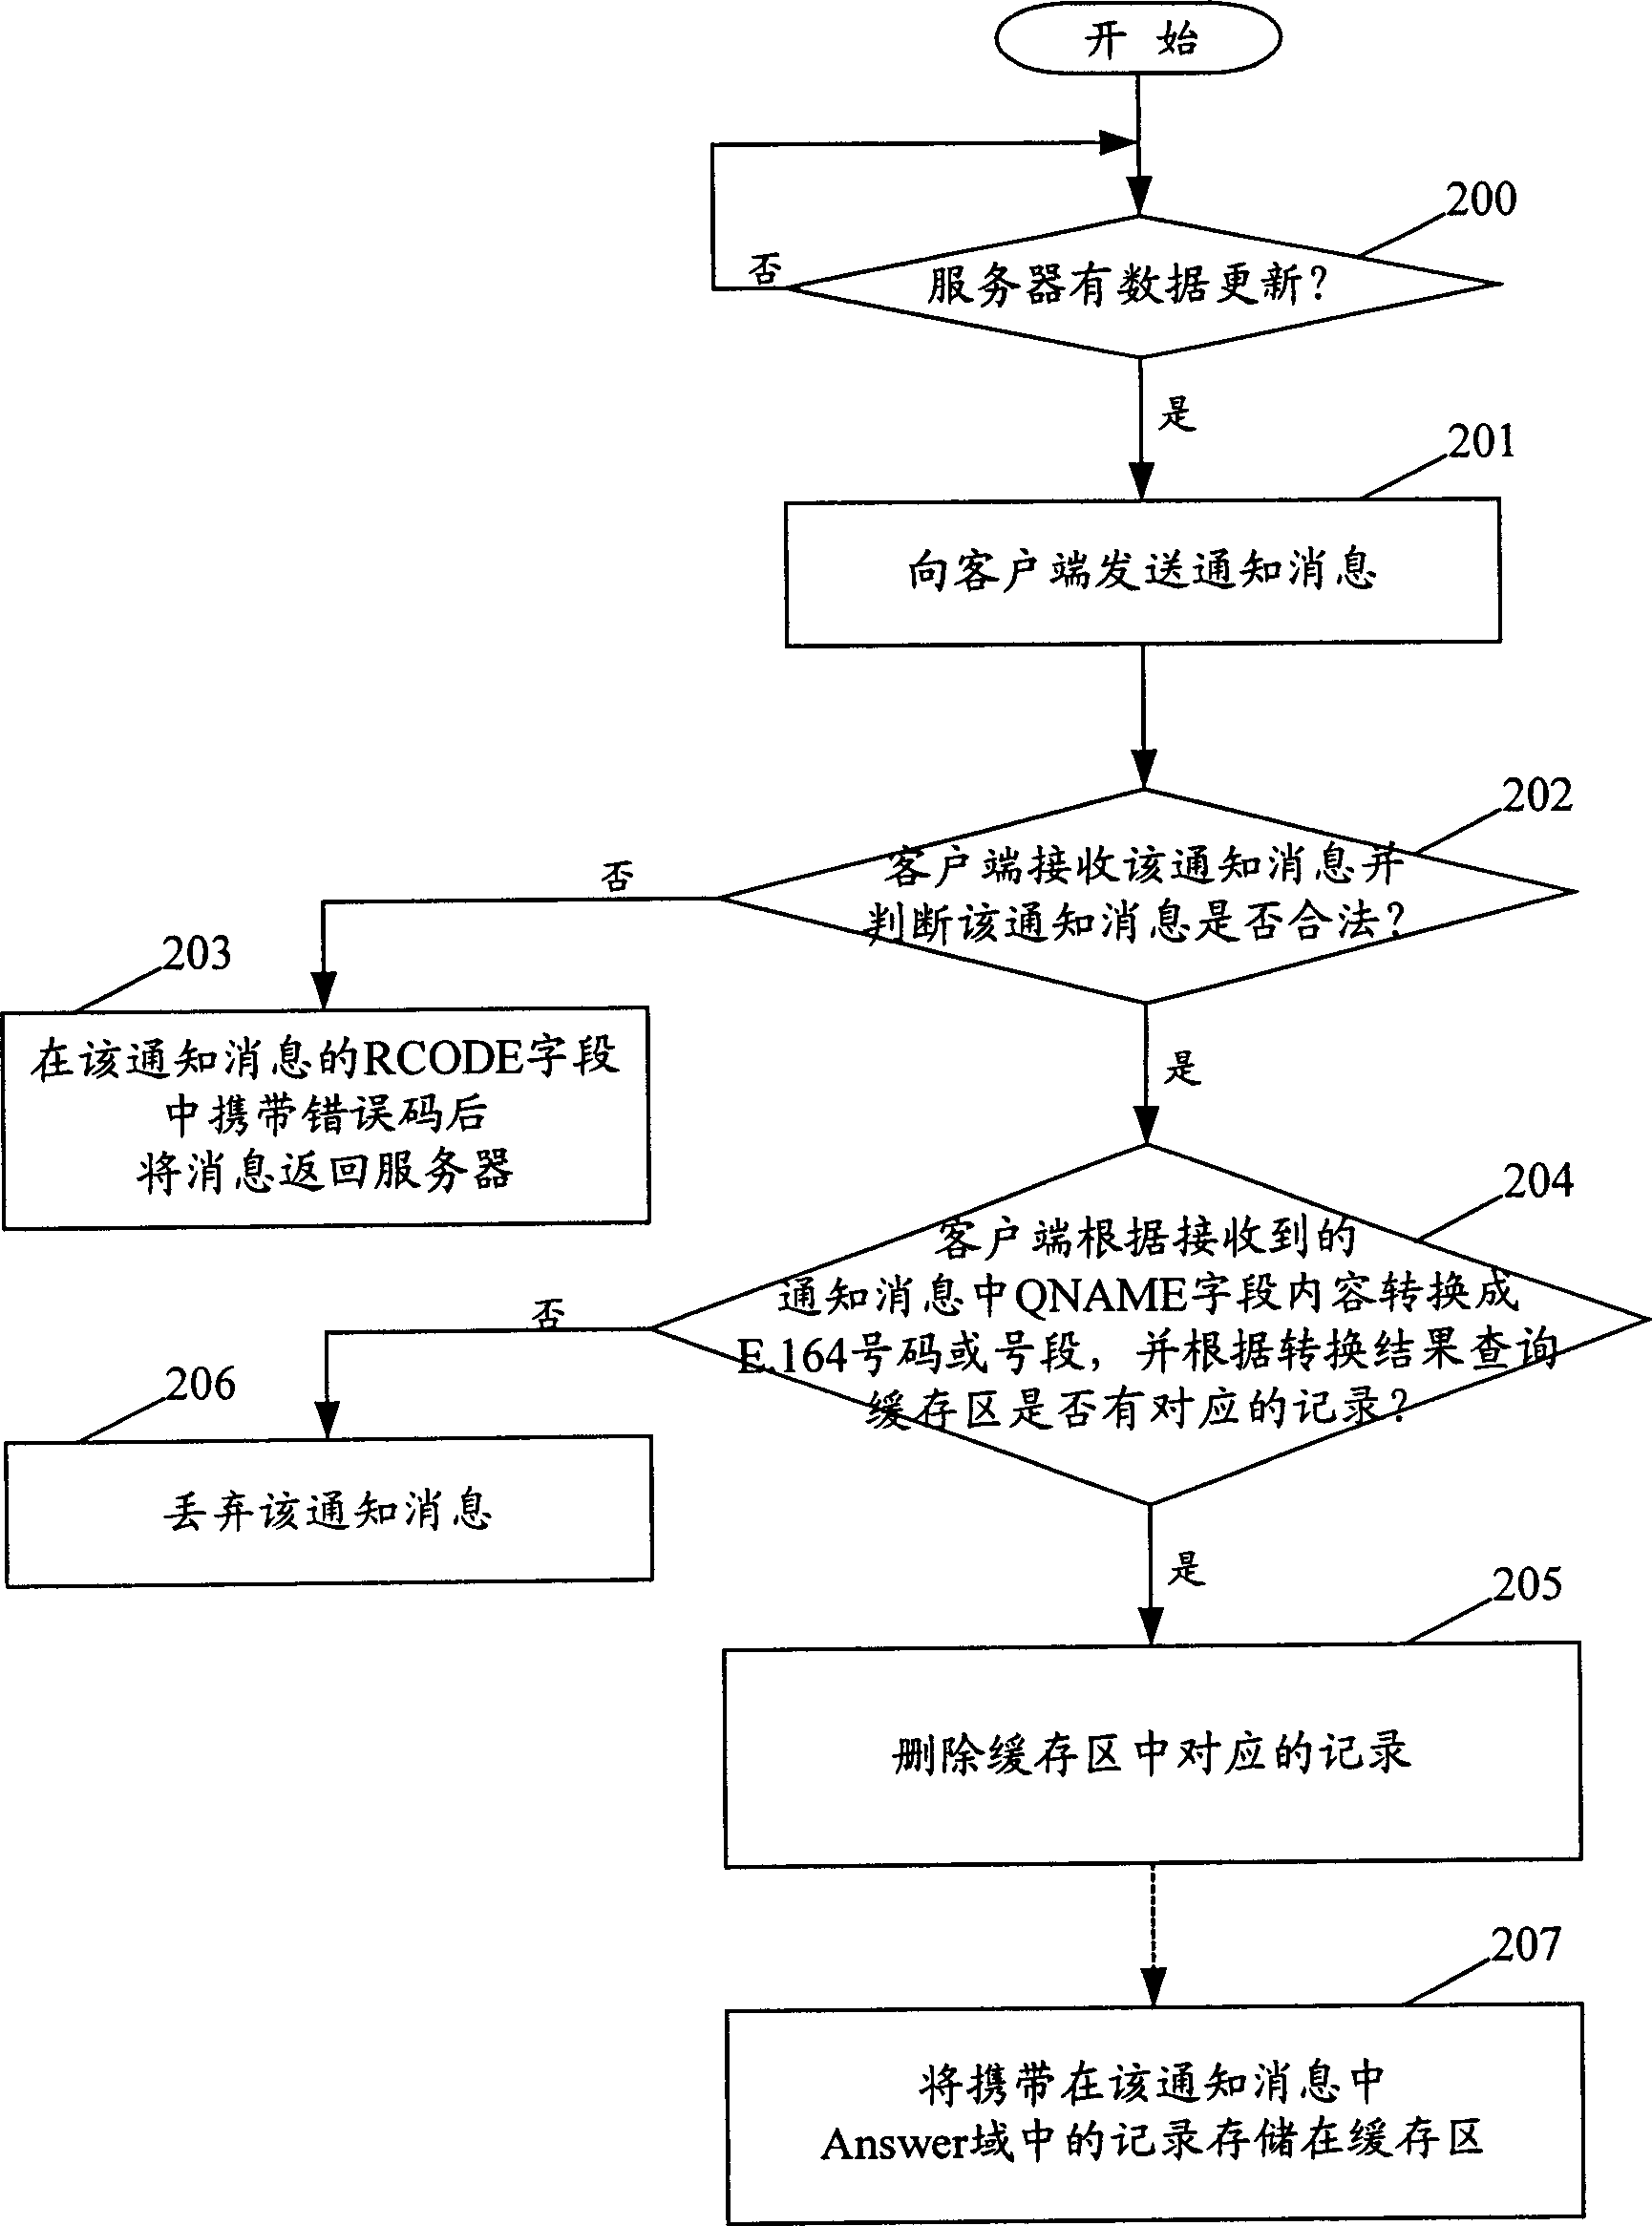 Method of implementing data synchronization between server and client in DNS mechanism